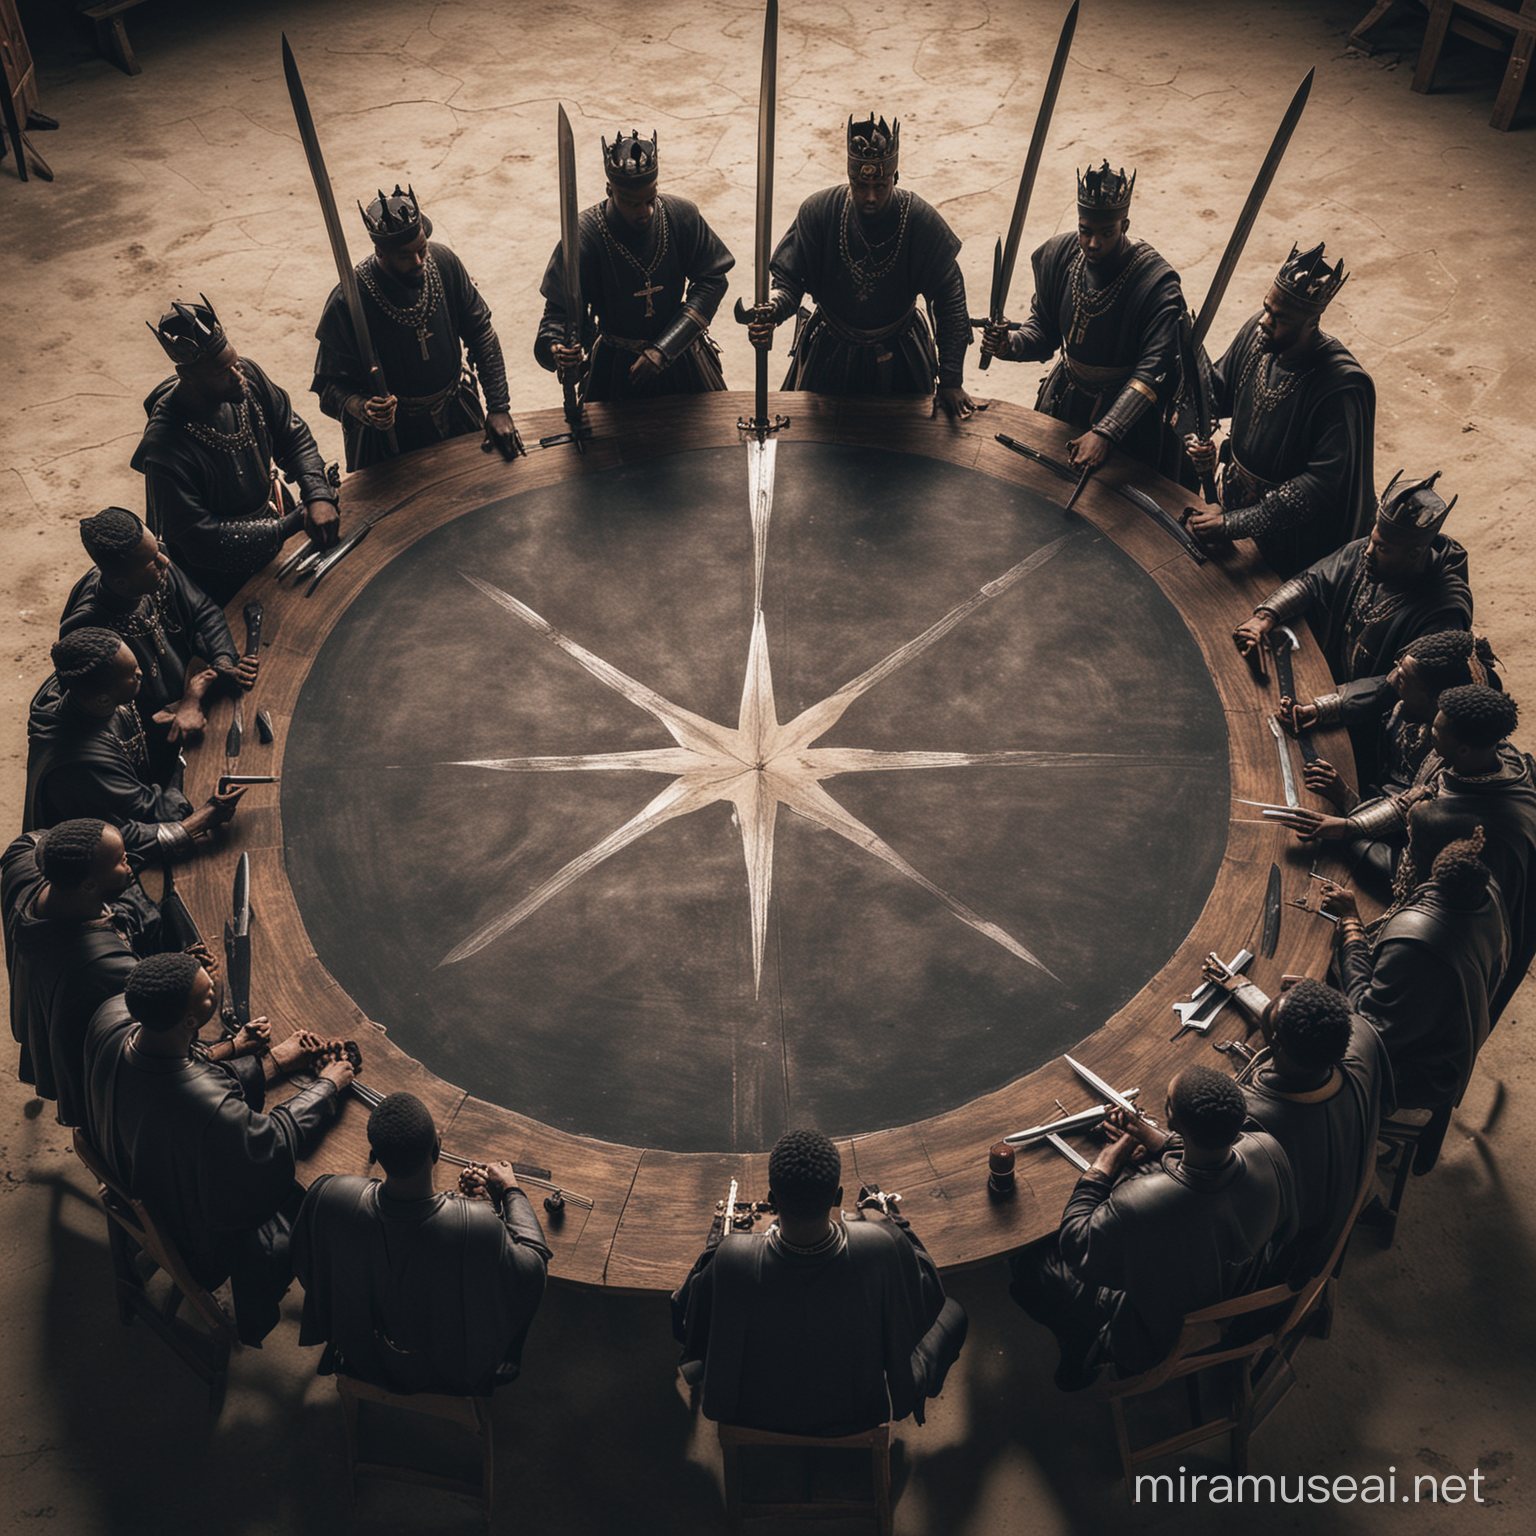 Black kings having a meeting placing their swords on a round table